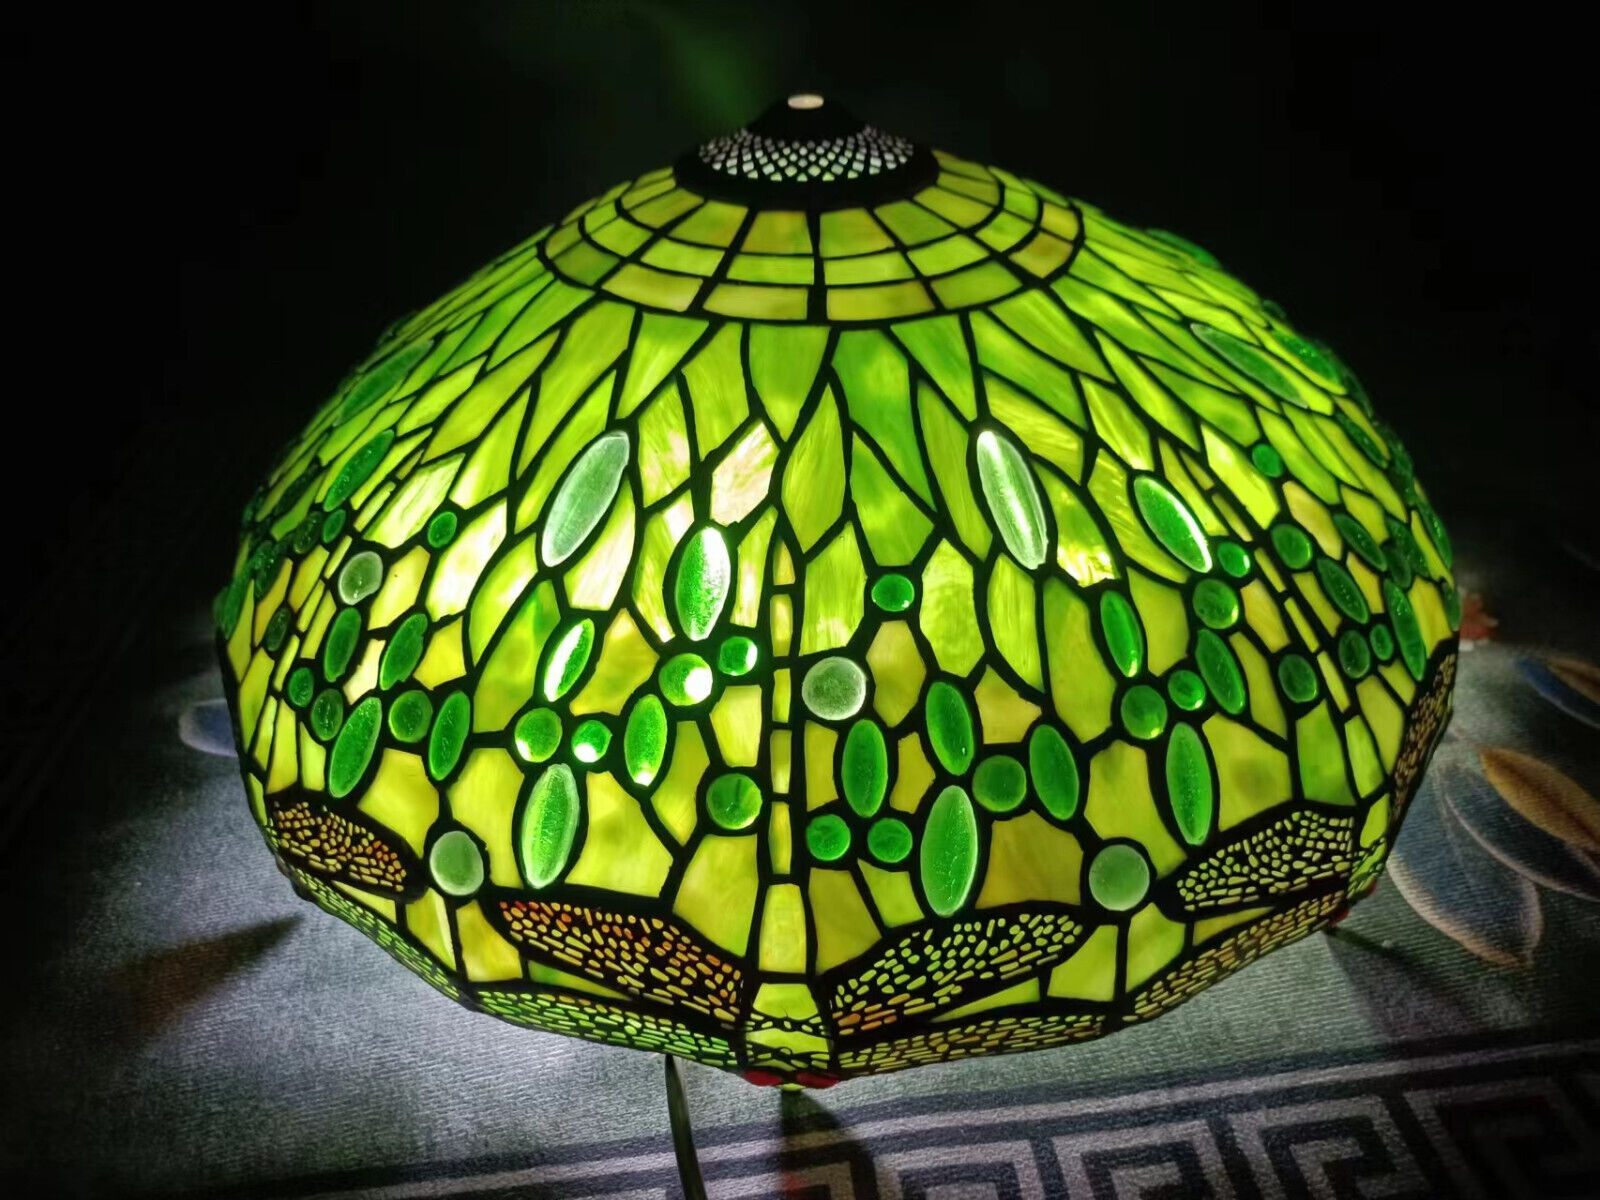 Reproduction Antique Tiffany lampshade